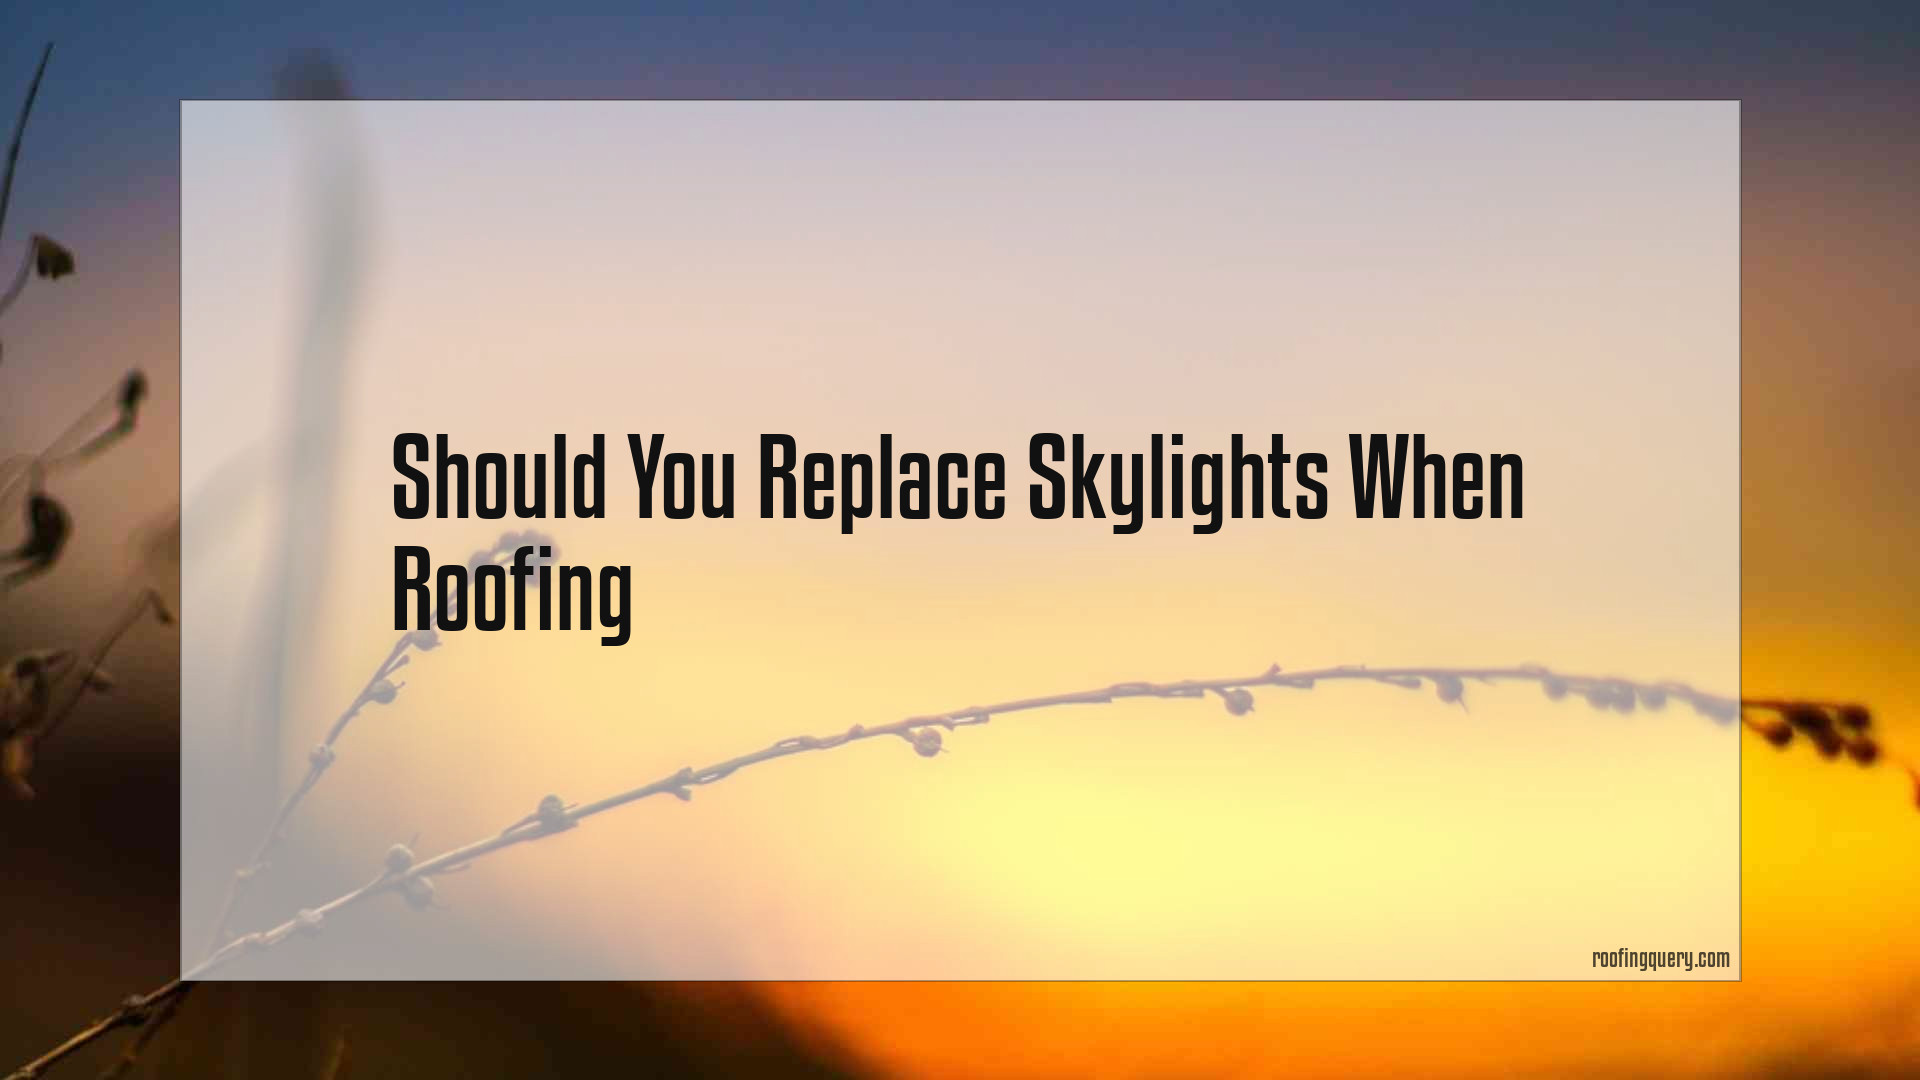 Should You Replace Skylights When Roofing